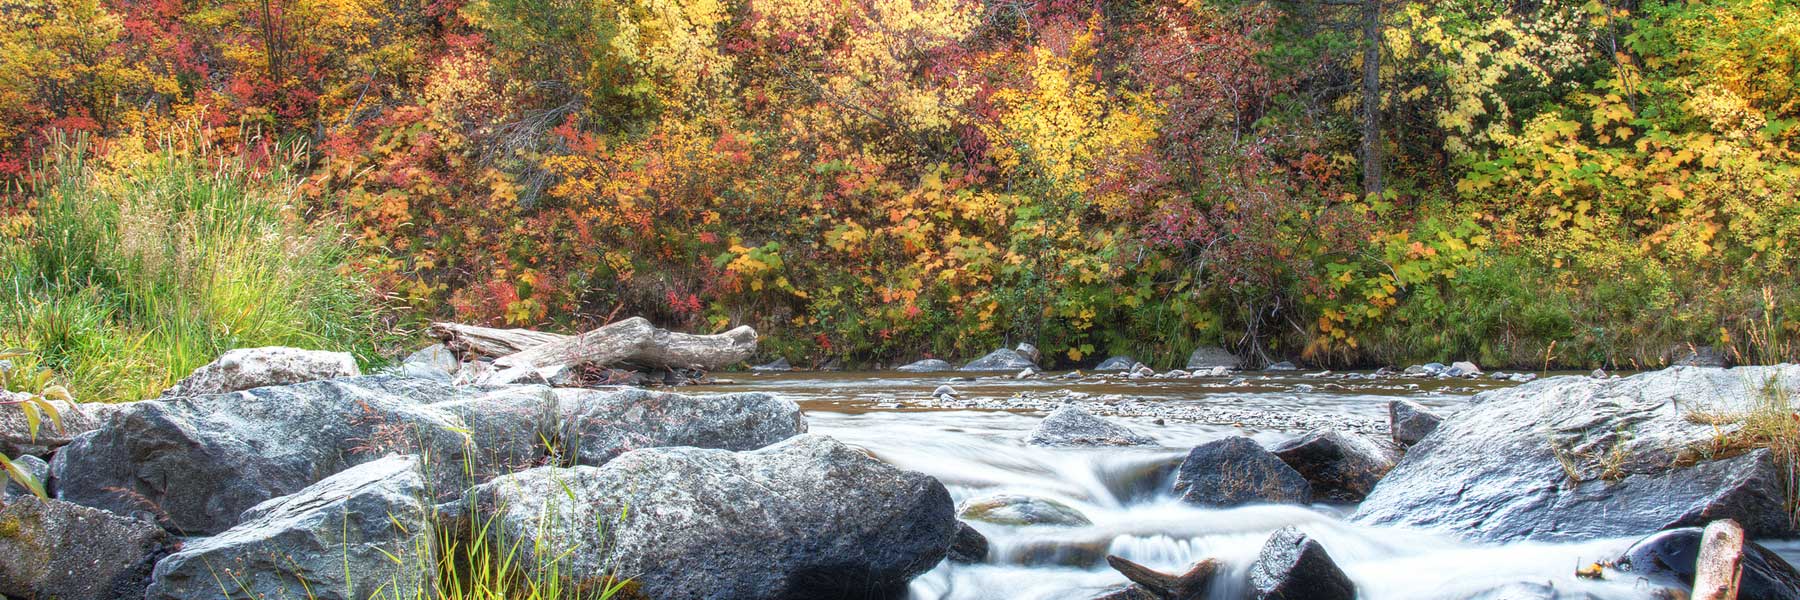 The Best Things To Do In Bozeman In The Fall - View Fall Colors